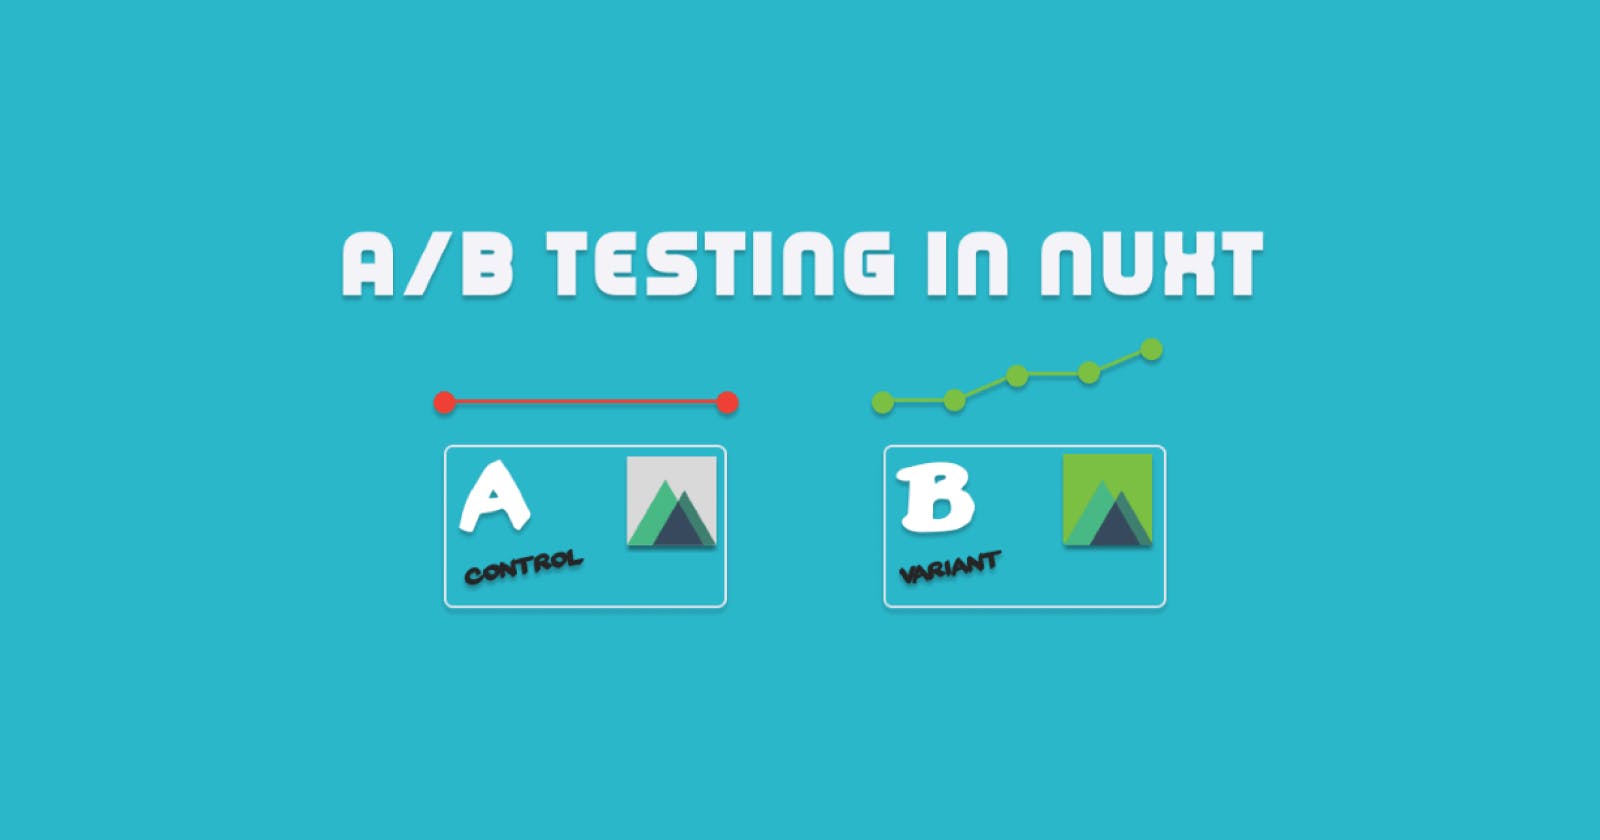 How to perform an A/B test in Nuxt.js